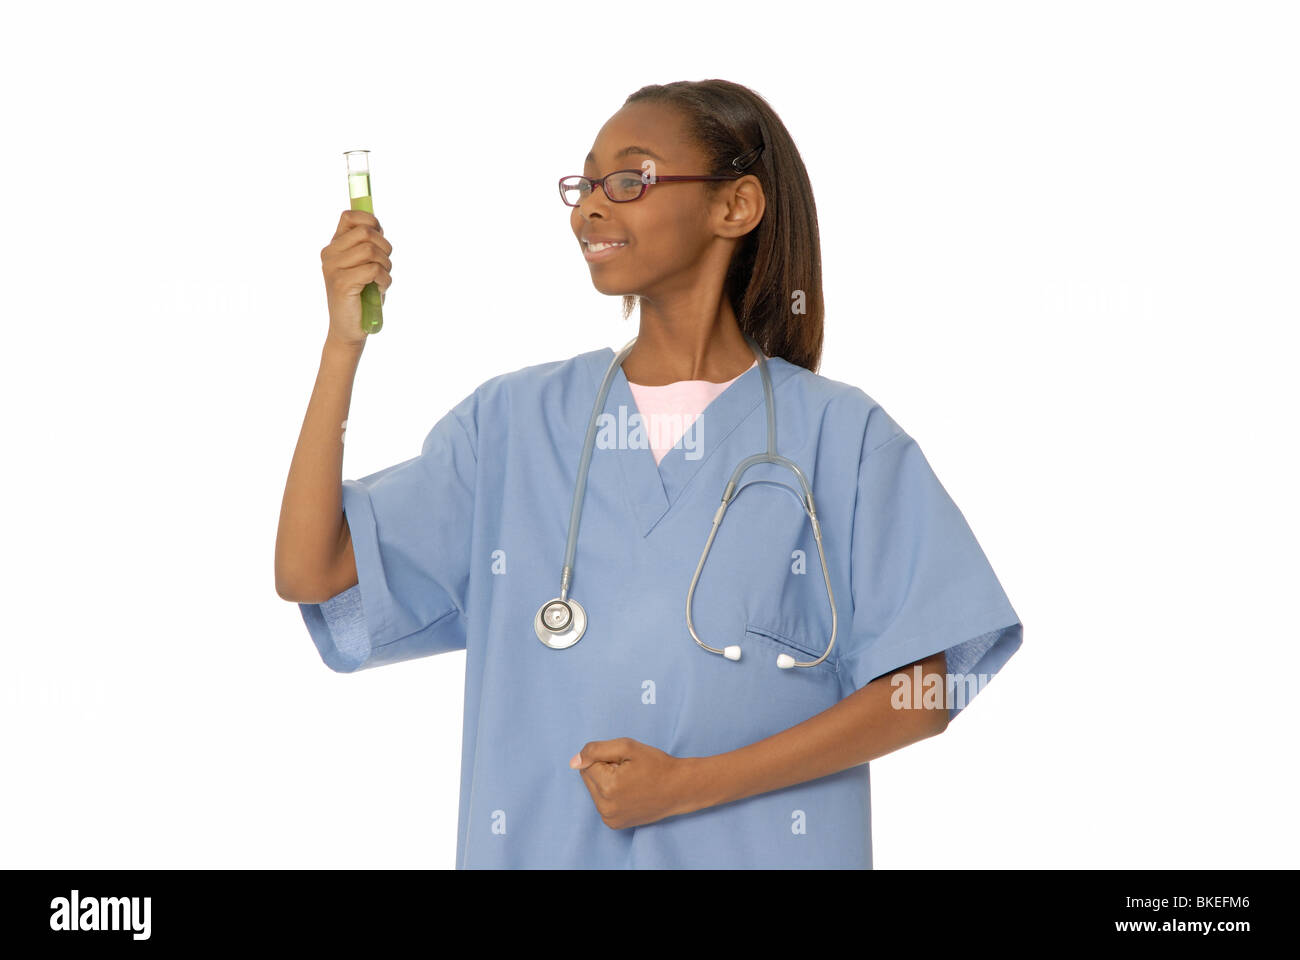 Ten year old girl dressed as a doctor, with a test tube or beaker. Stock Photo